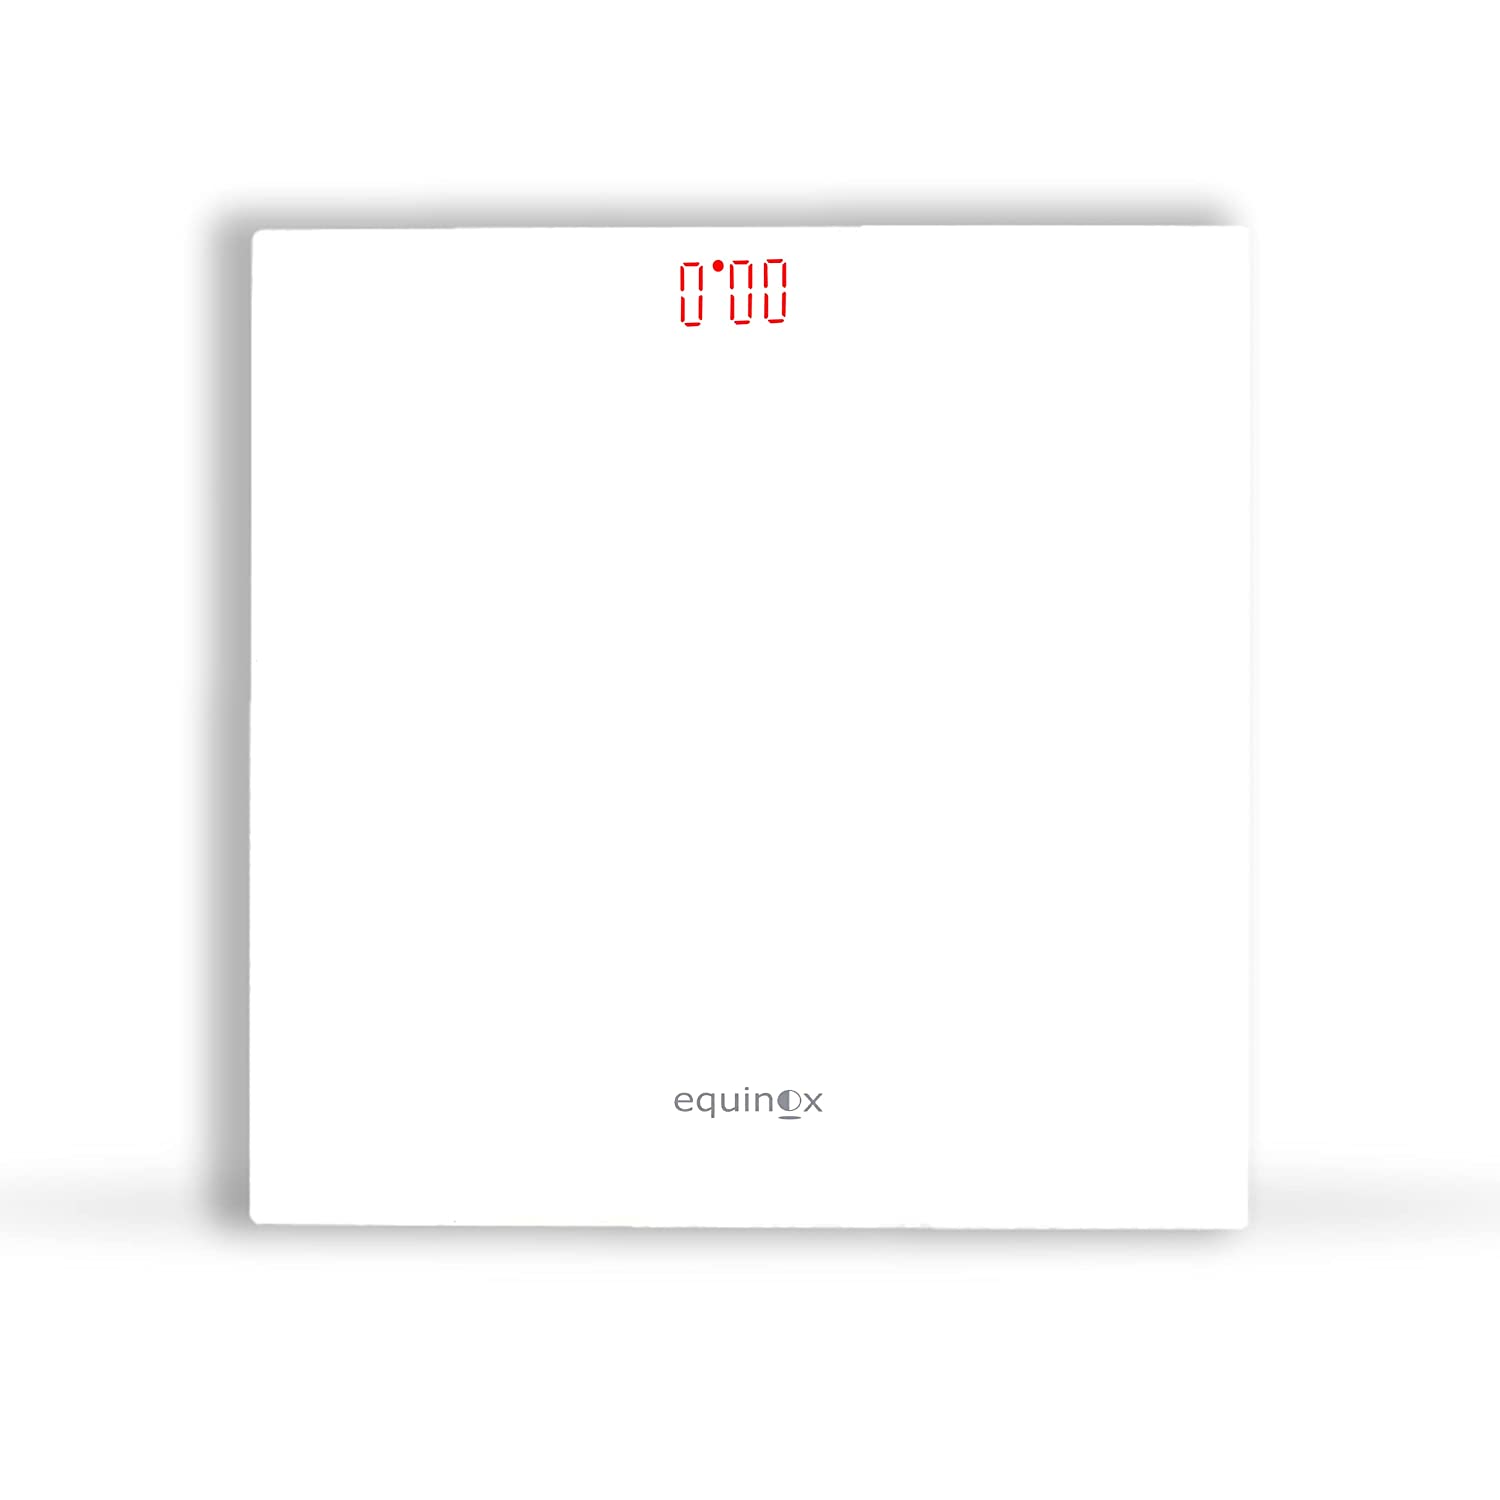 Equinox Personal Digital Weighing Scale EQ-EB-9000 for body weight, Slim and Sleek, Magic Display in Red color, Ultra Lightweight, 18 months warranty (white)